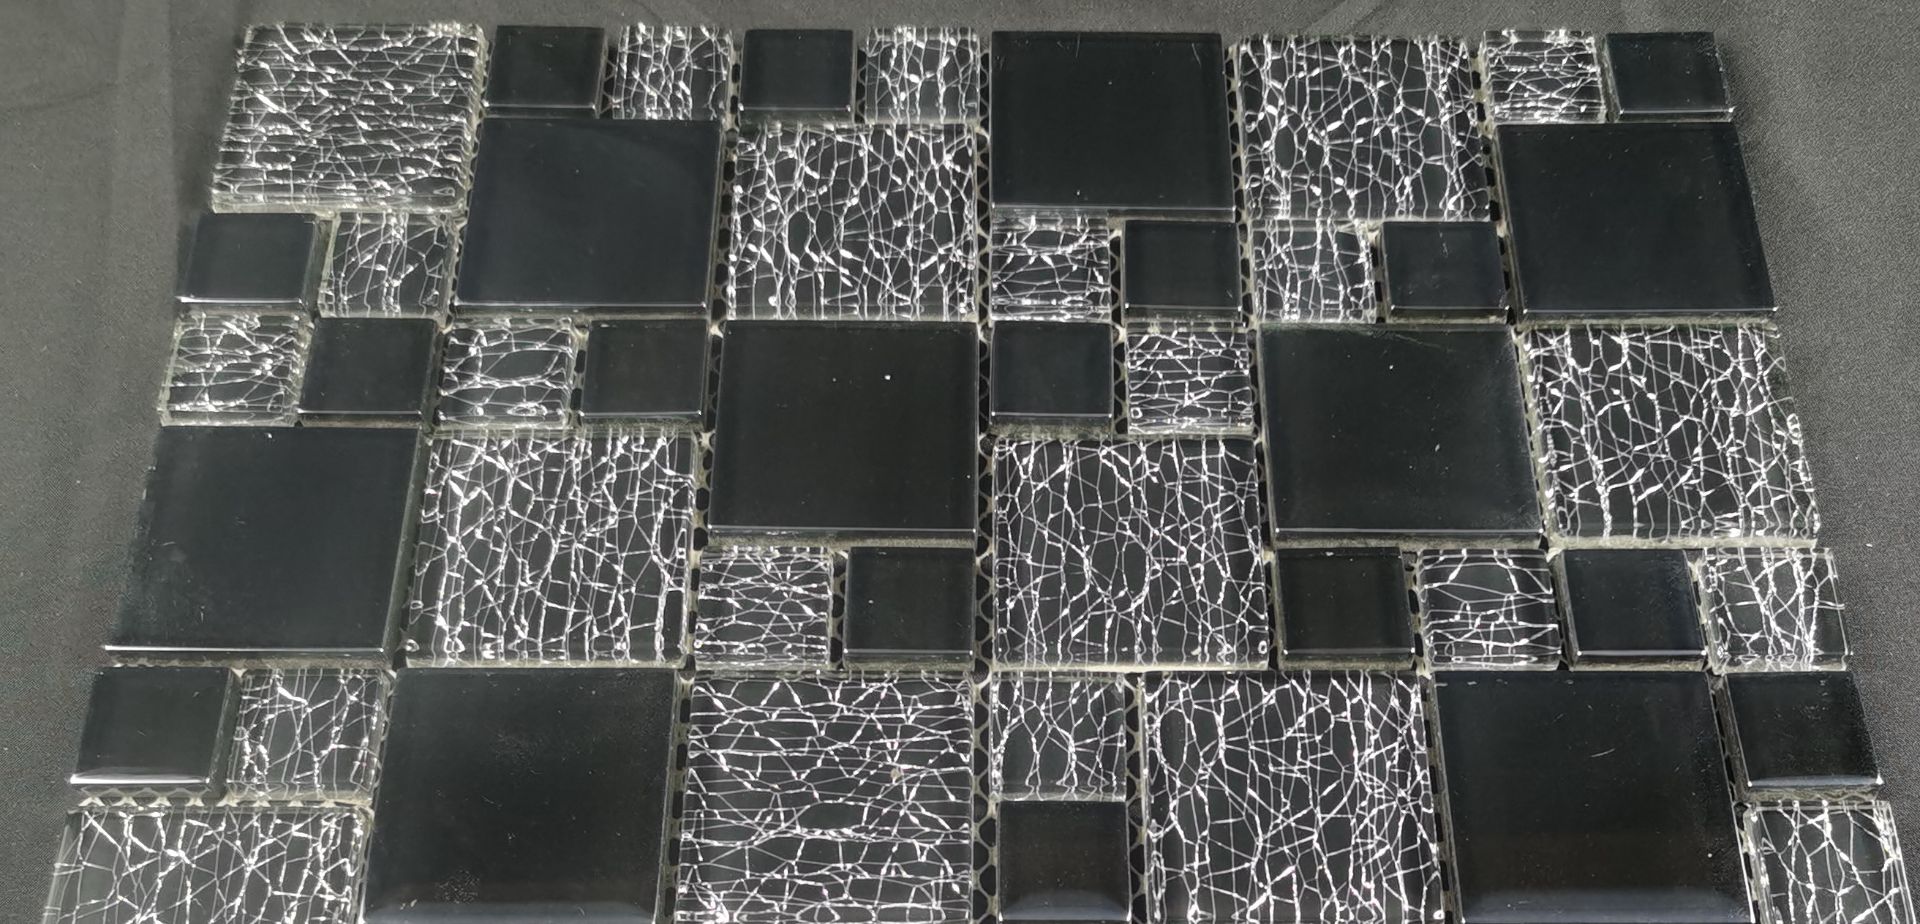 10 Square Metres - High Quality Glass/Stainless Steel Mosaic Tiles -110 Sheets - Image 3 of 5